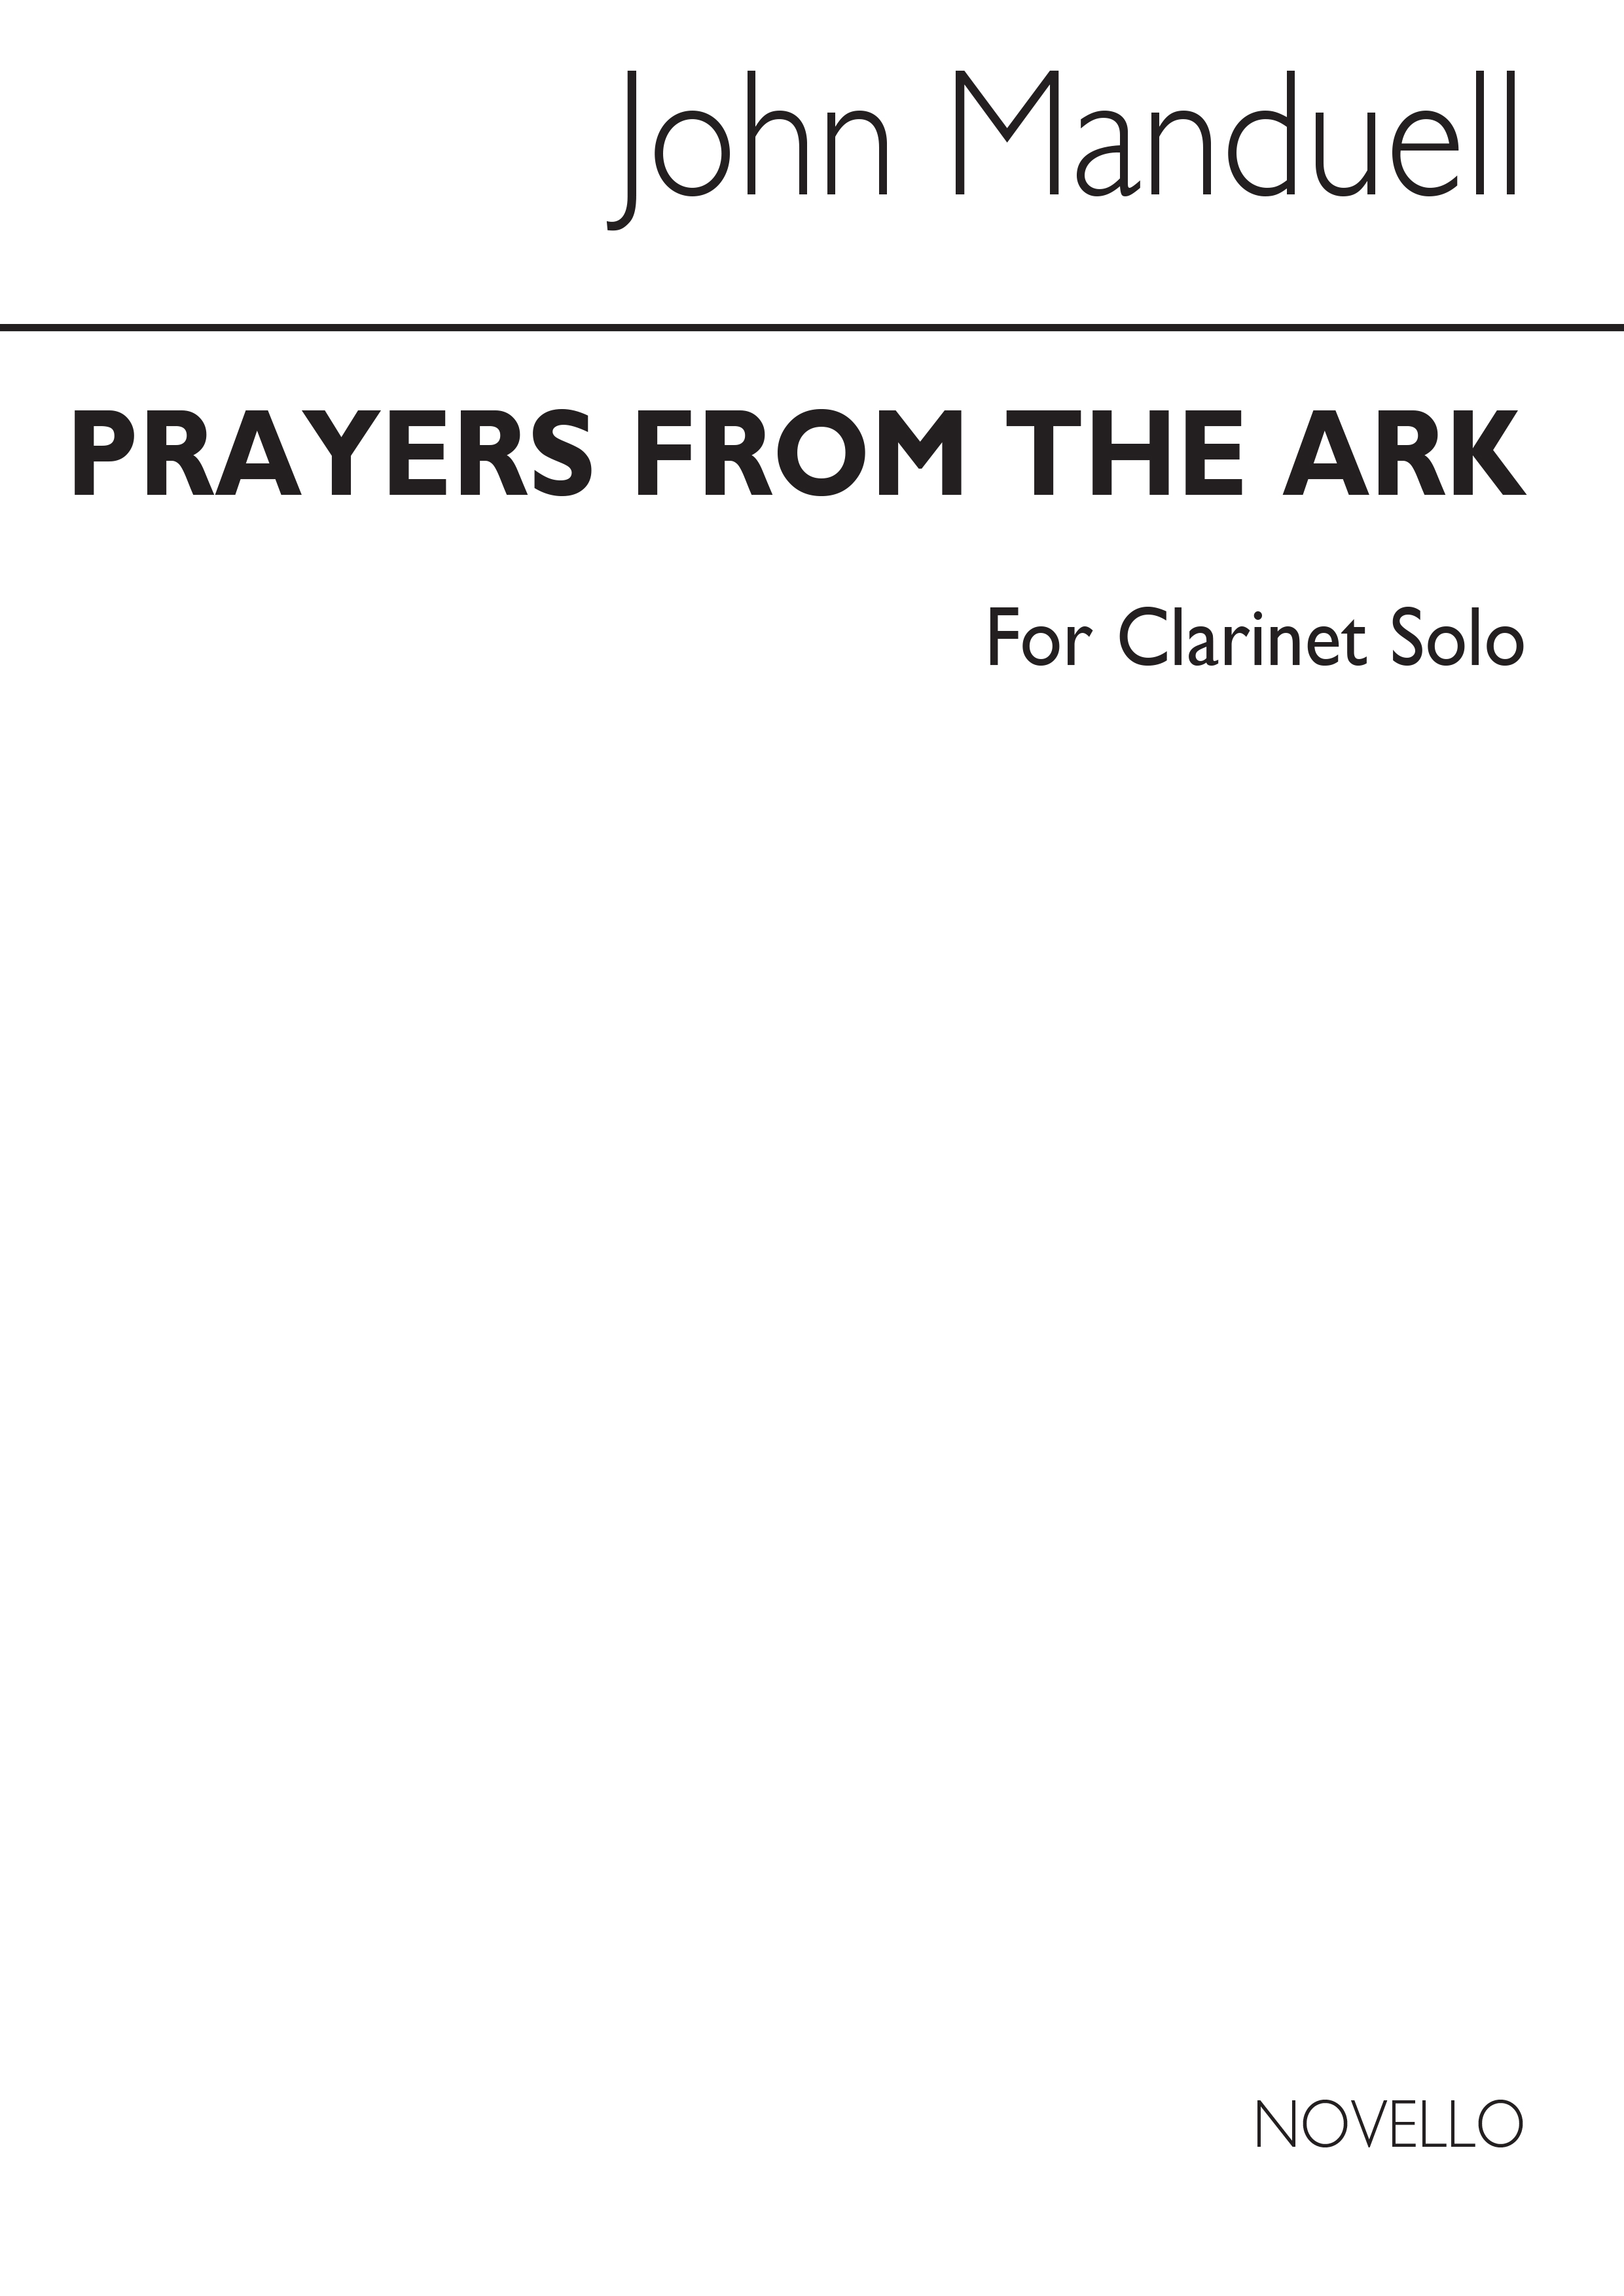 Manduell: Prayers From The Ark for Solo Clarinet